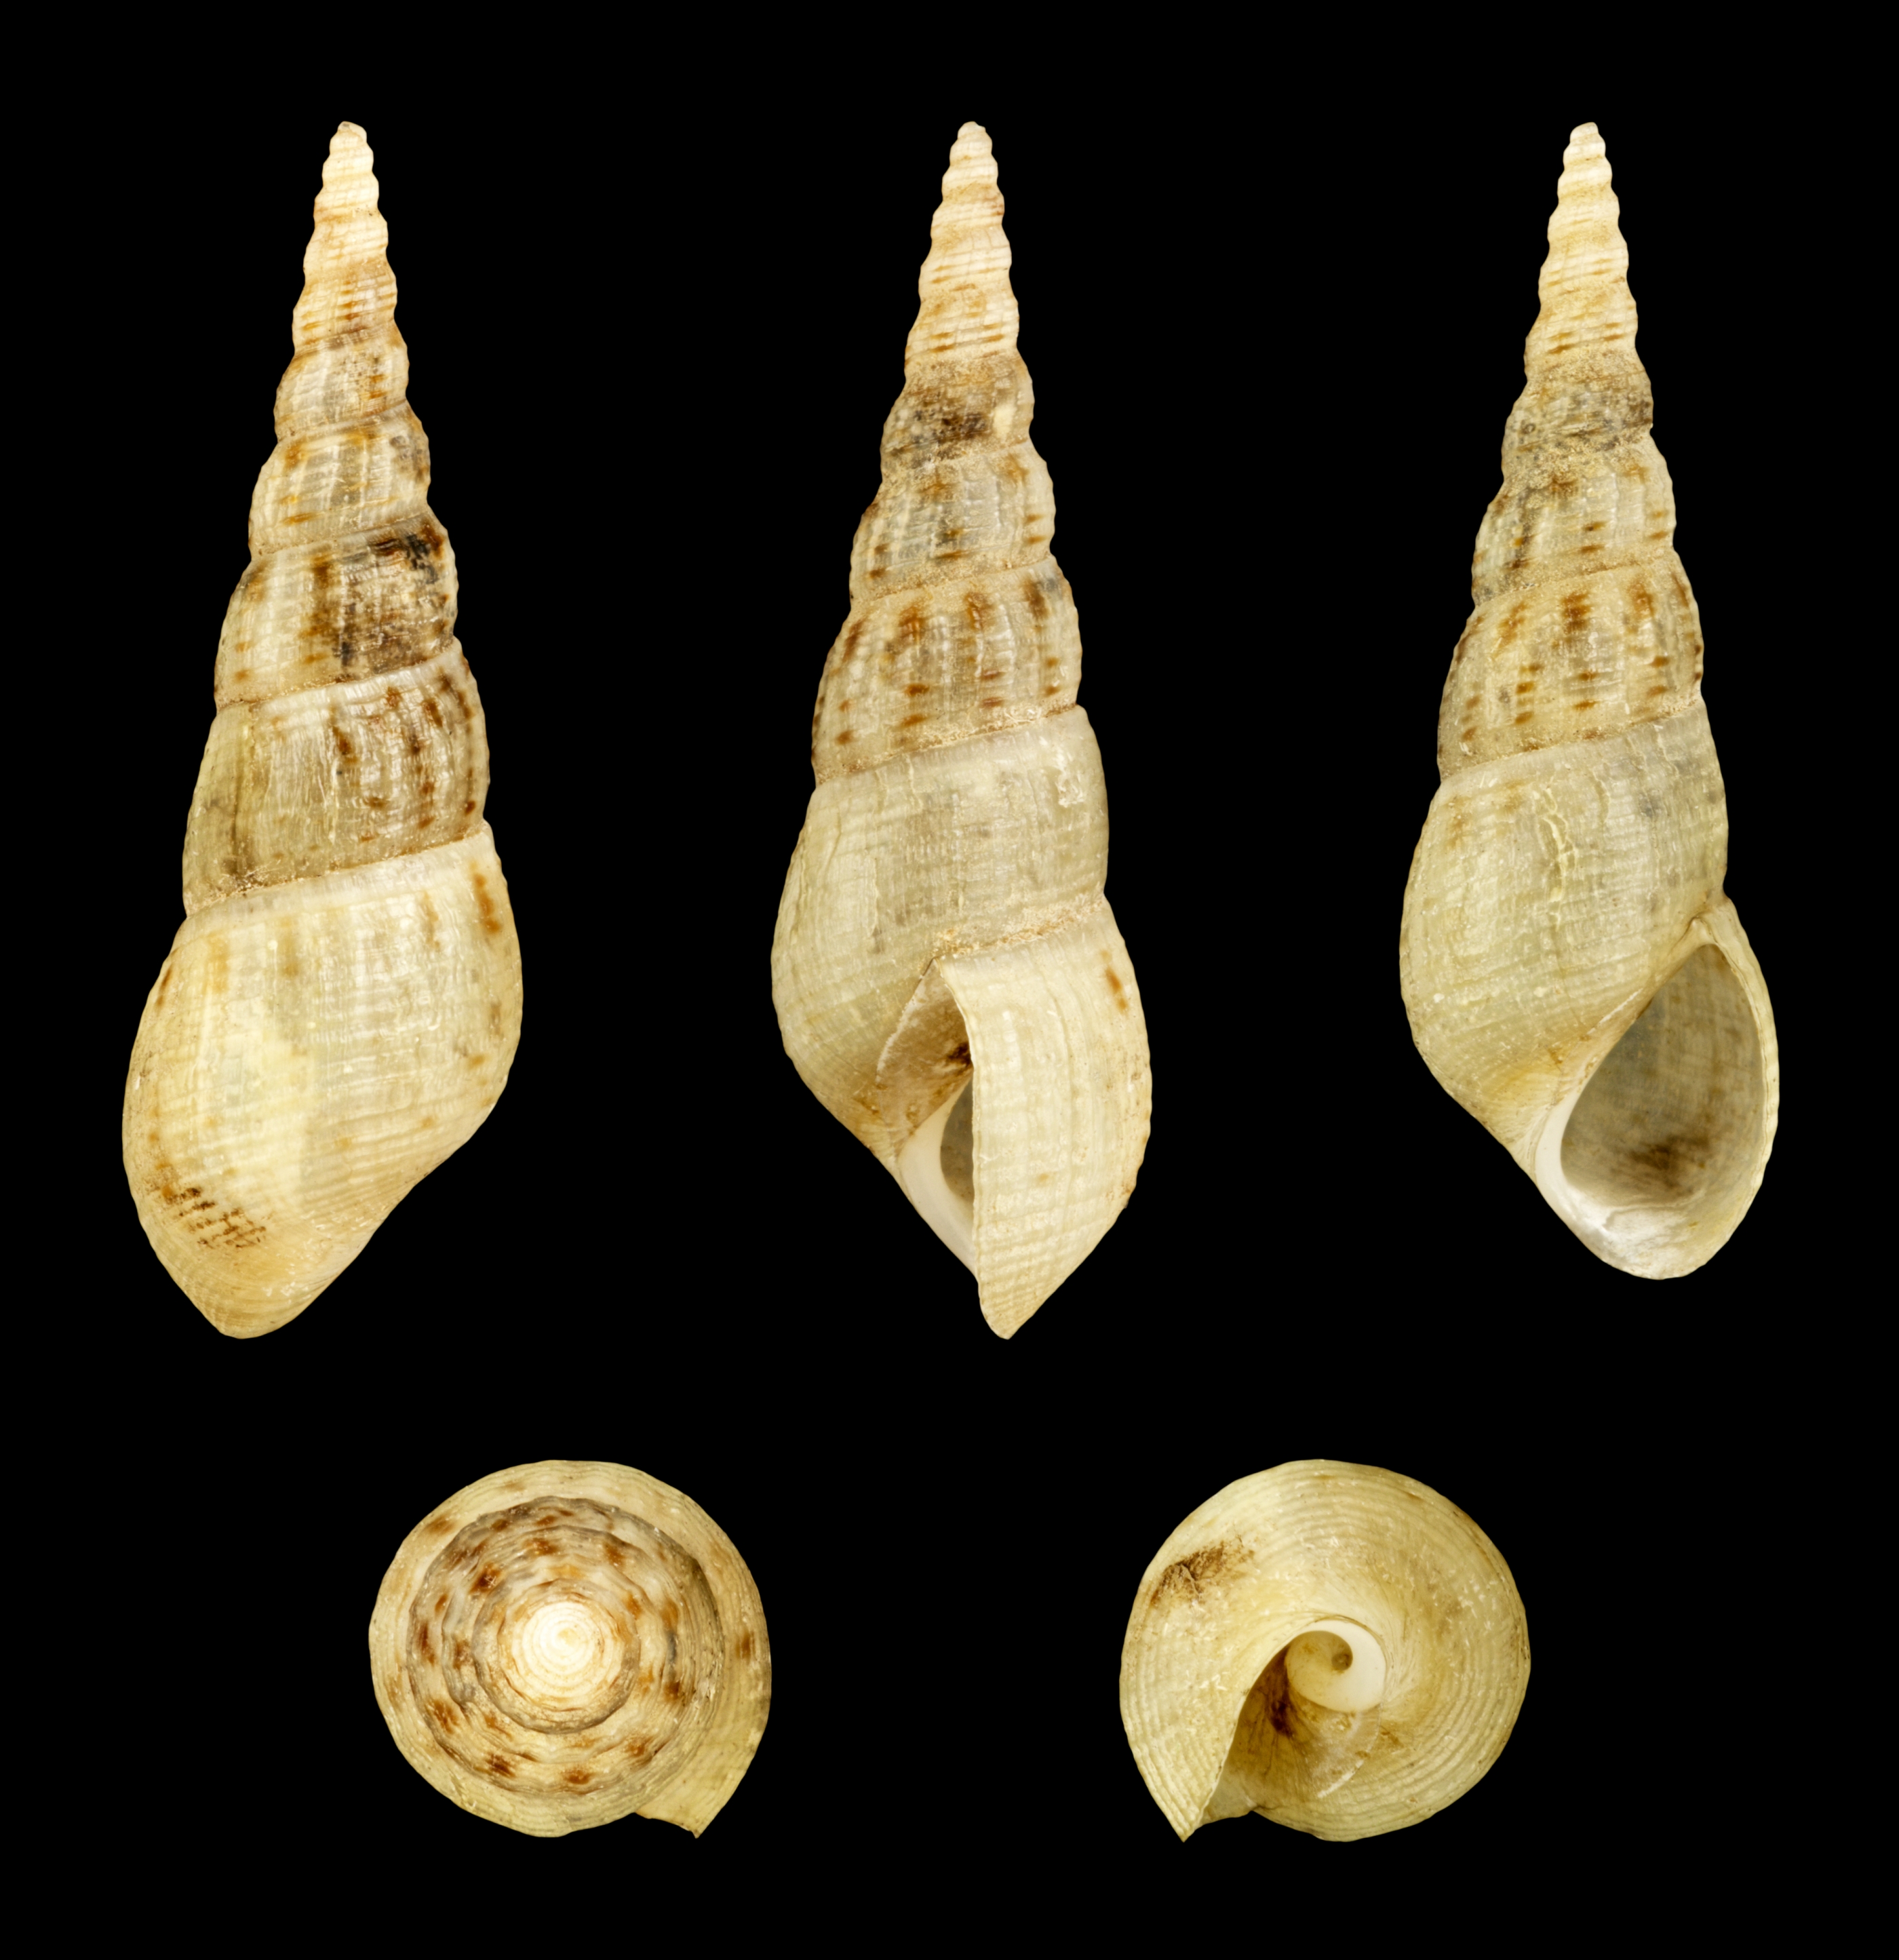 EOS Research Fellow Dr Yama Dixit investigates how snail shells might be used to improve sea-level estimates (Source: Wikimedia Commons)